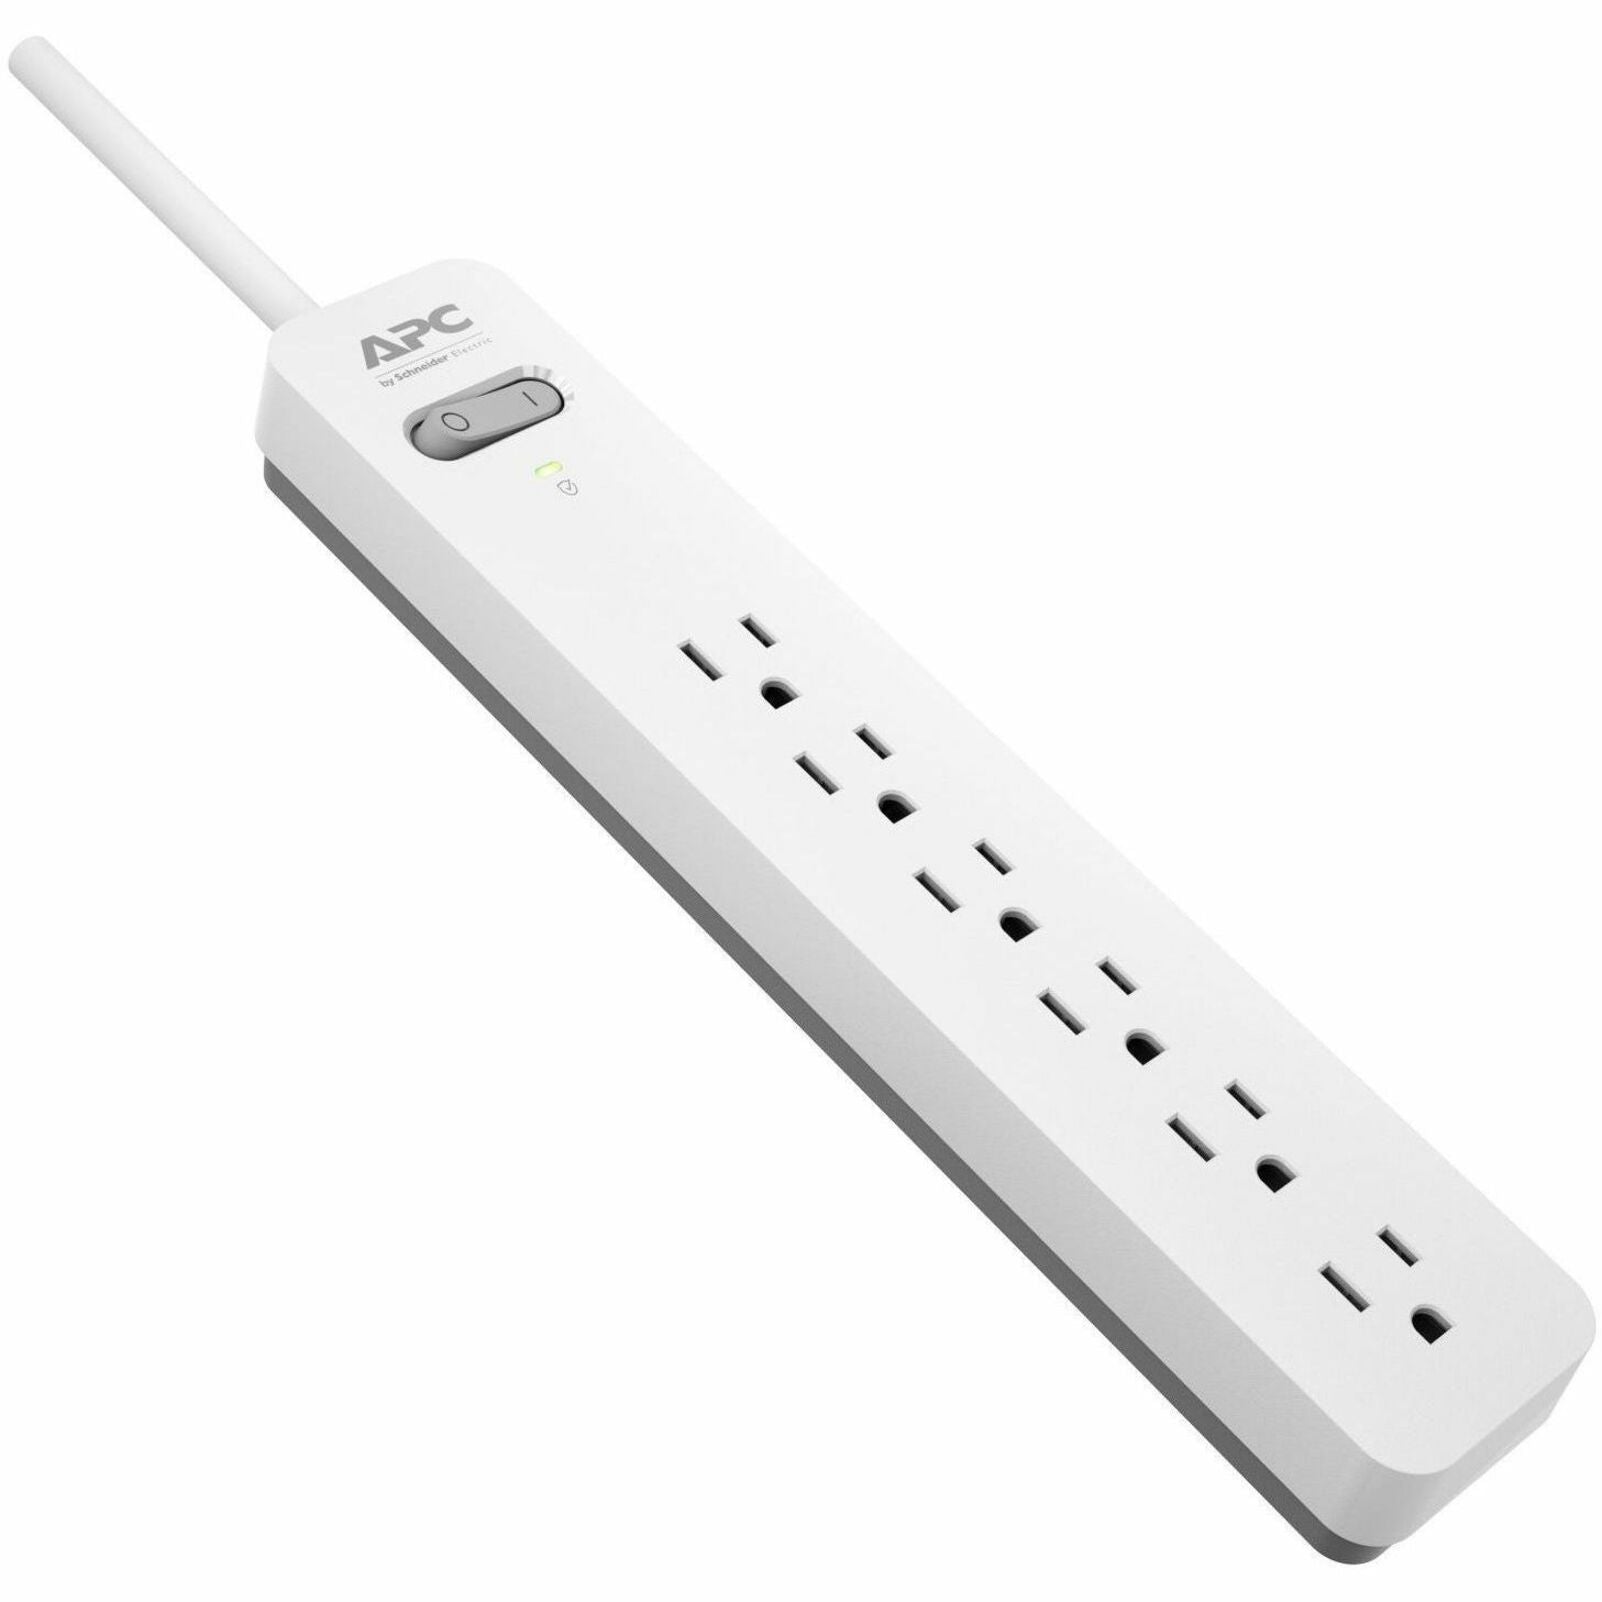 APC PE66WG Essential SurgeArrest 6 Outlet 6 Foot Cord 120V, White and Grey, Lifetime Warranty, 1080 J Surge Energy Rating